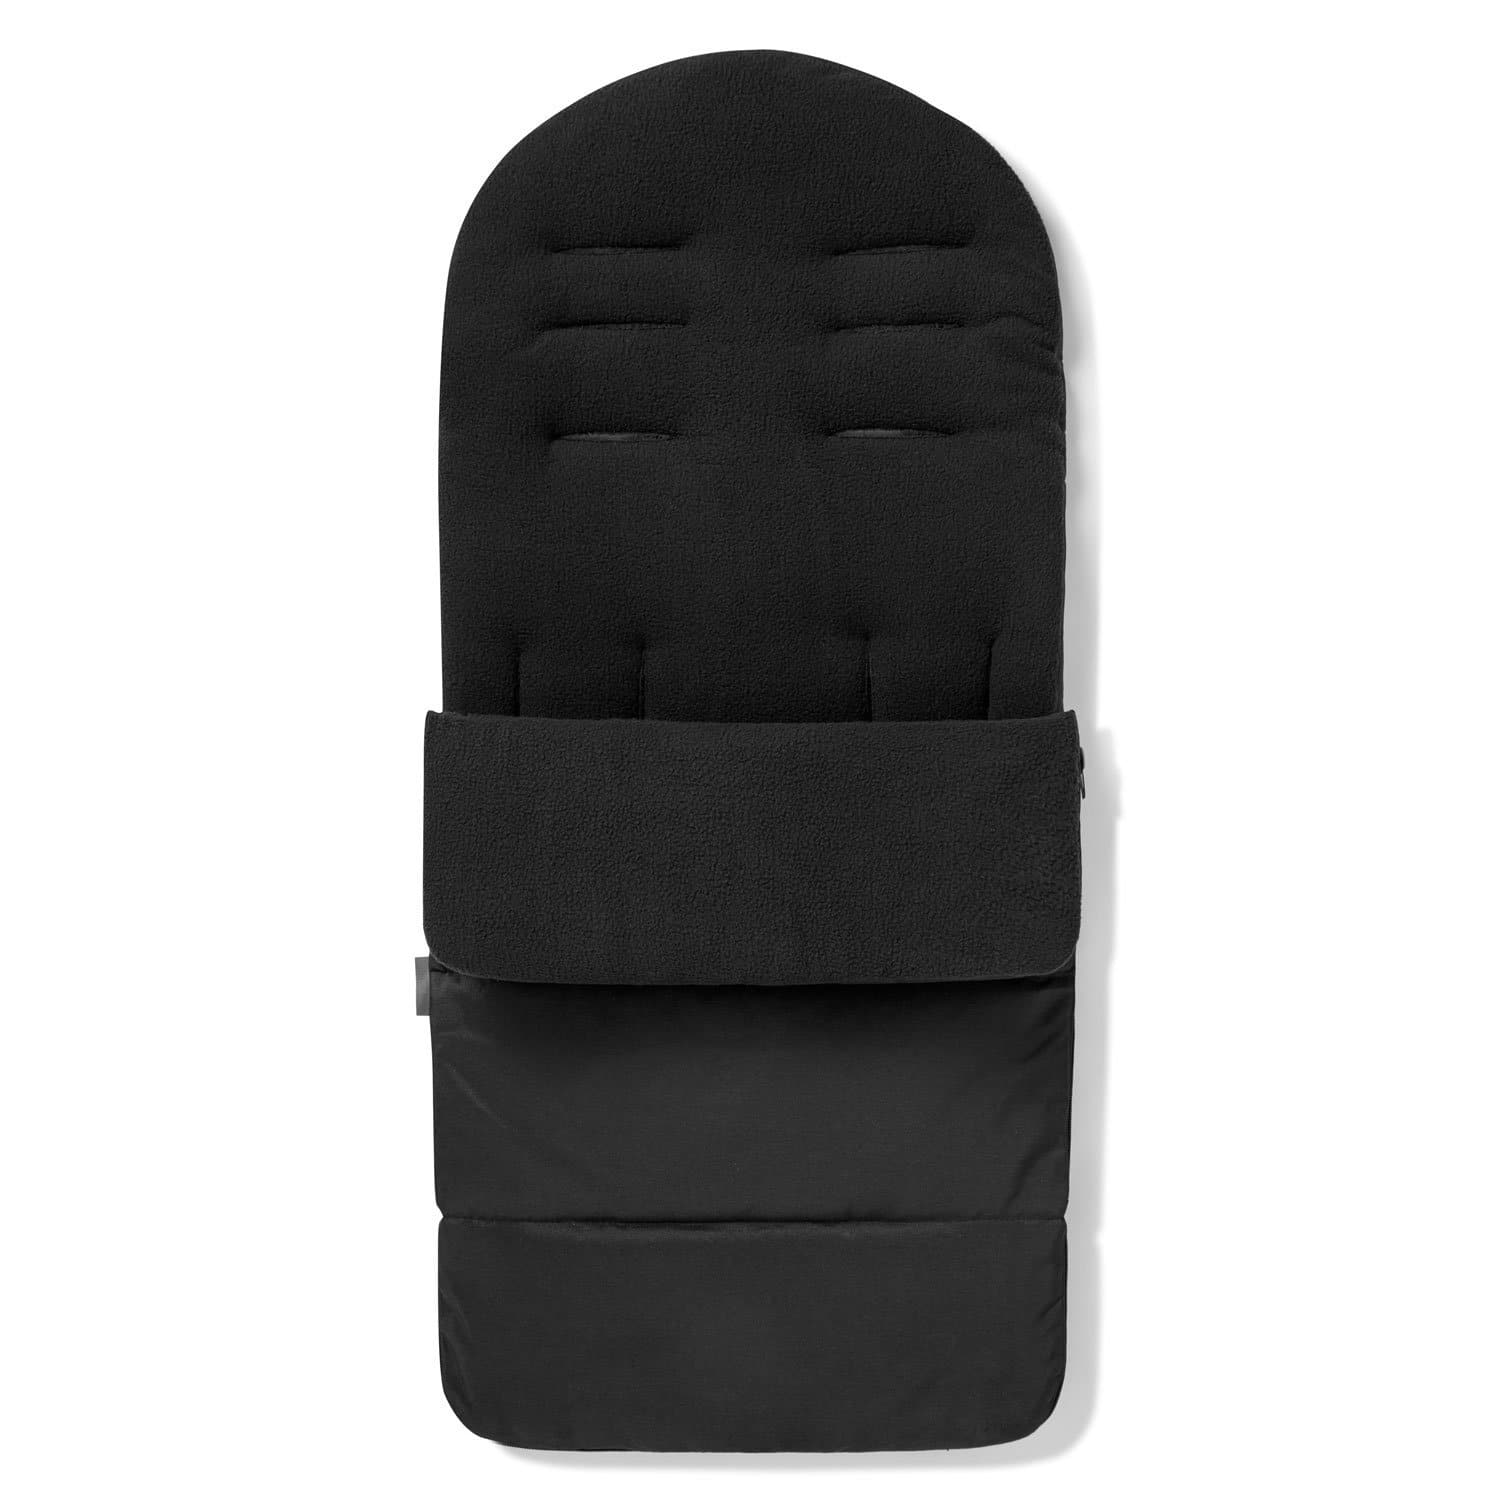 Premium Footmuff / Cosy Toes Compatible with Excel - Black Jack / Fits All Models | For Your Little One